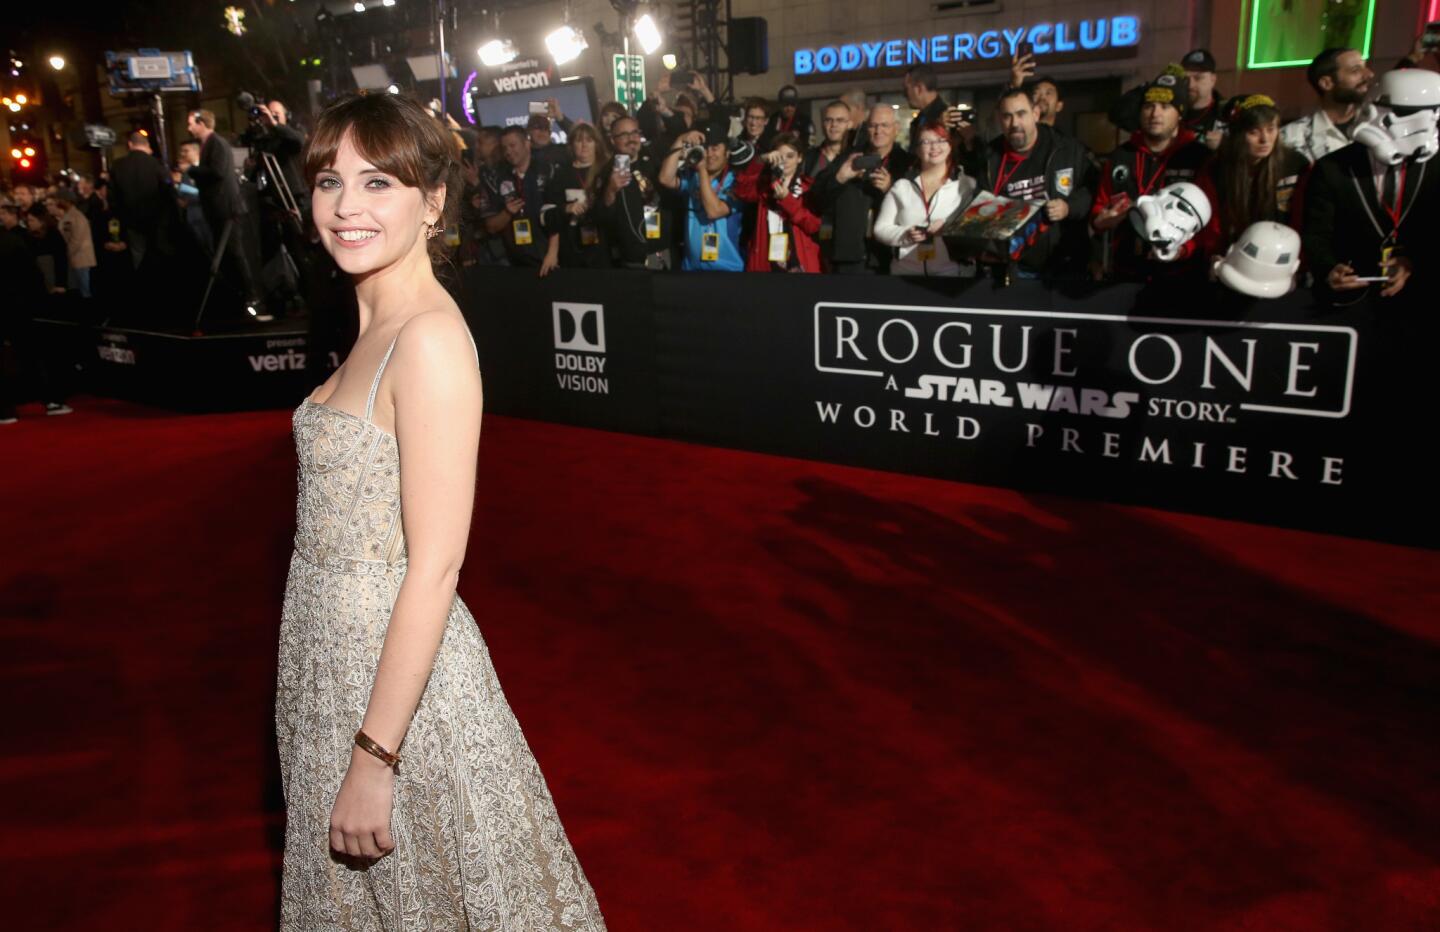 Actress Felicity Jones attends the world premiere of Lucasfilm's standalone Star Wars adventure "Rogue One: A Star Wars Story" at the Pantages Theatre in Hollywood on Saturday night.